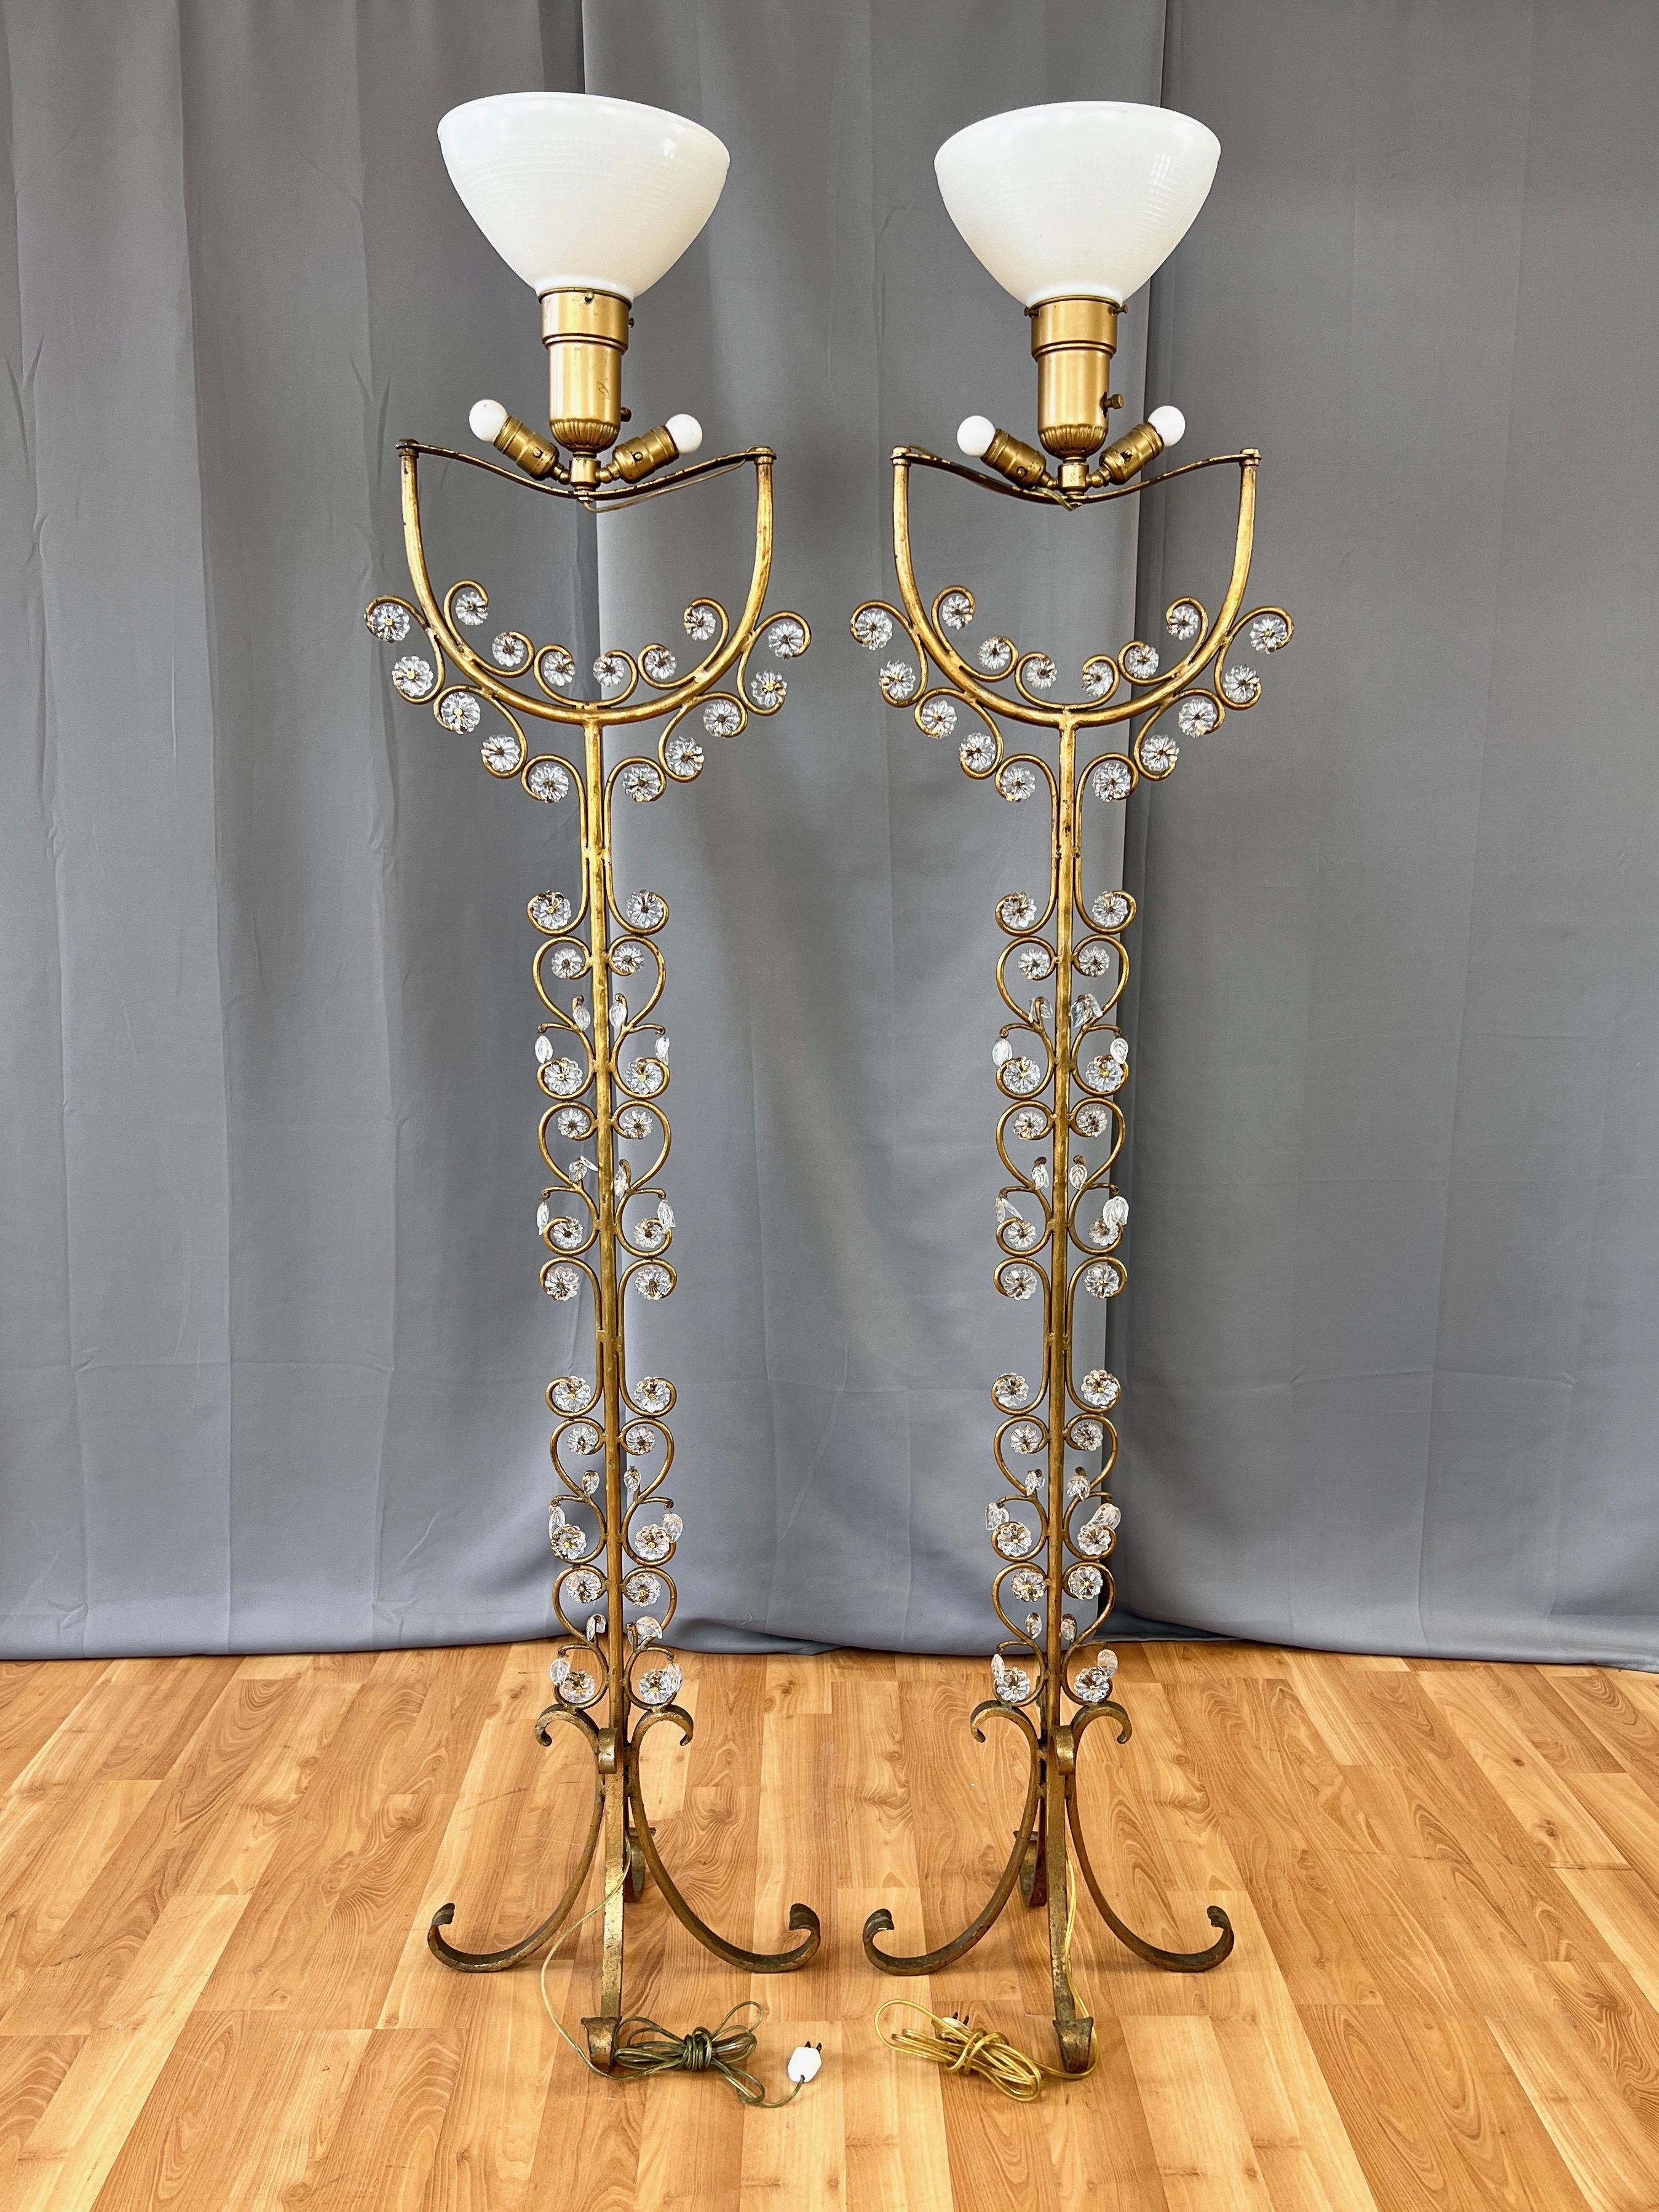 Pair of Italian Gilt Wrought Iron Floor Lamps with Glass Florets & Leaves, 1950s For Sale 10